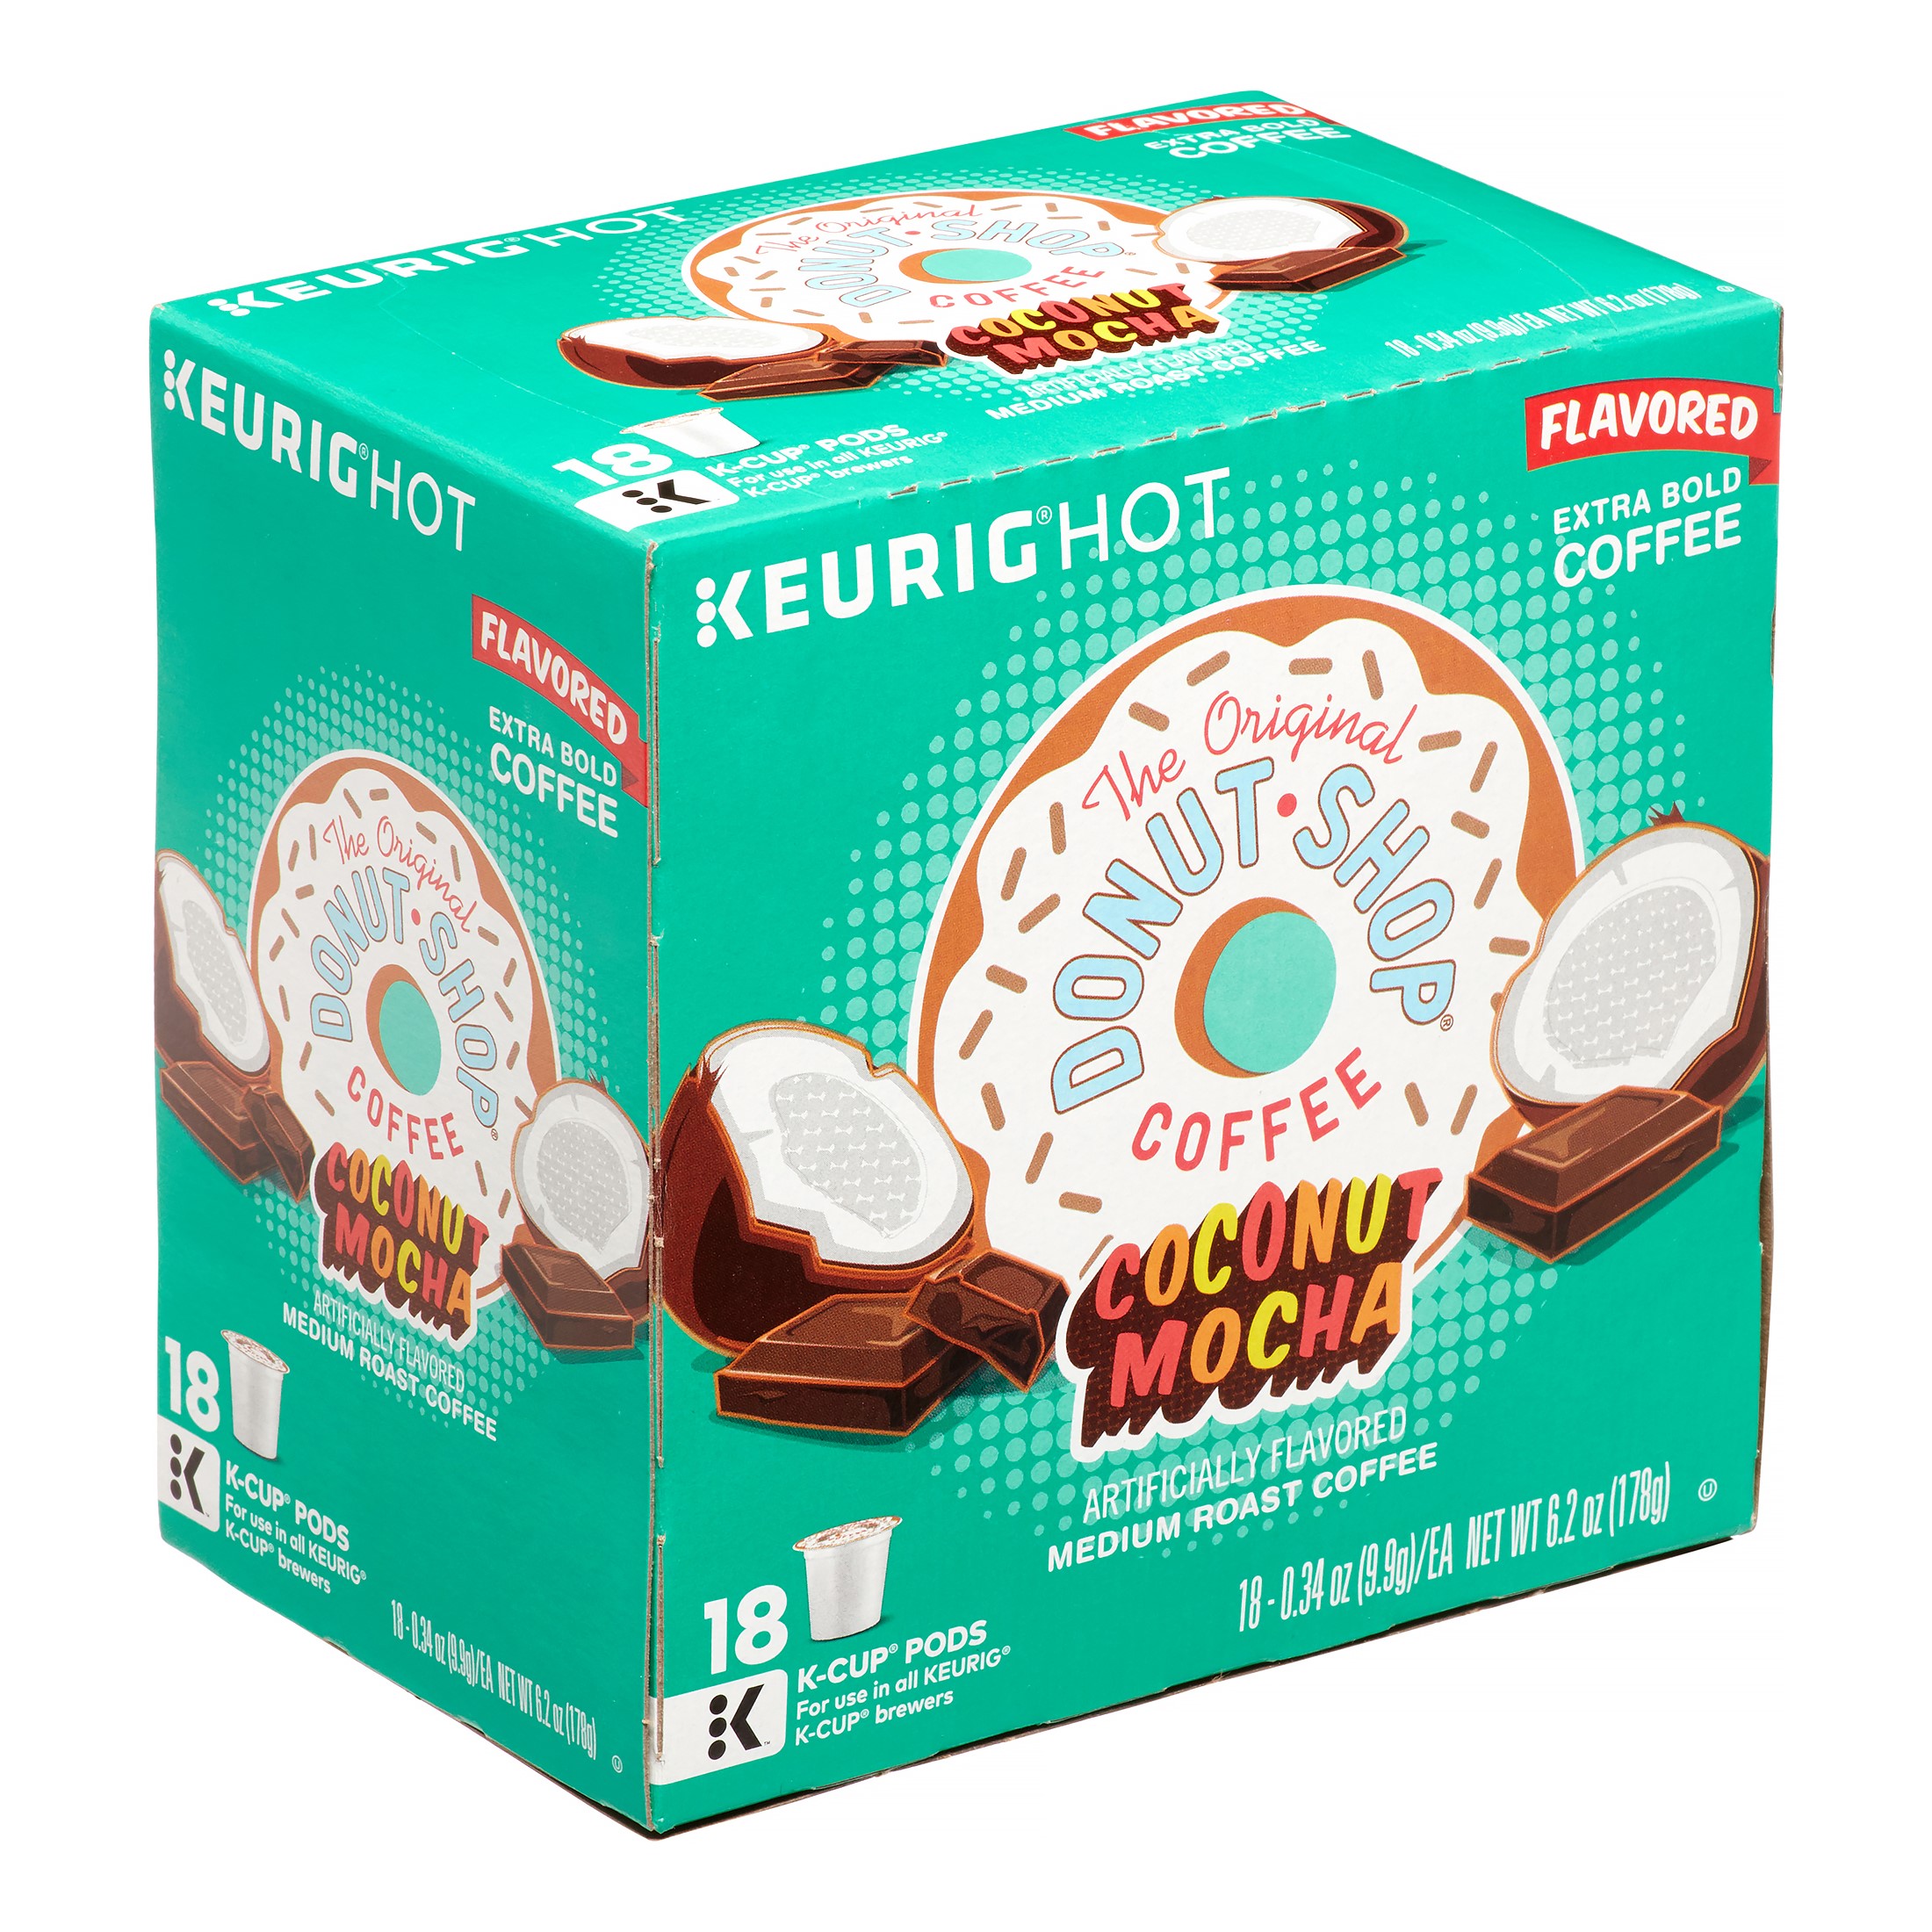 The Original Donut Shop Coconut Mocha Flavored K-Cup Coffee Pods, Medium Roast, 18 Count for Keurig Brewers - image 4 of 10